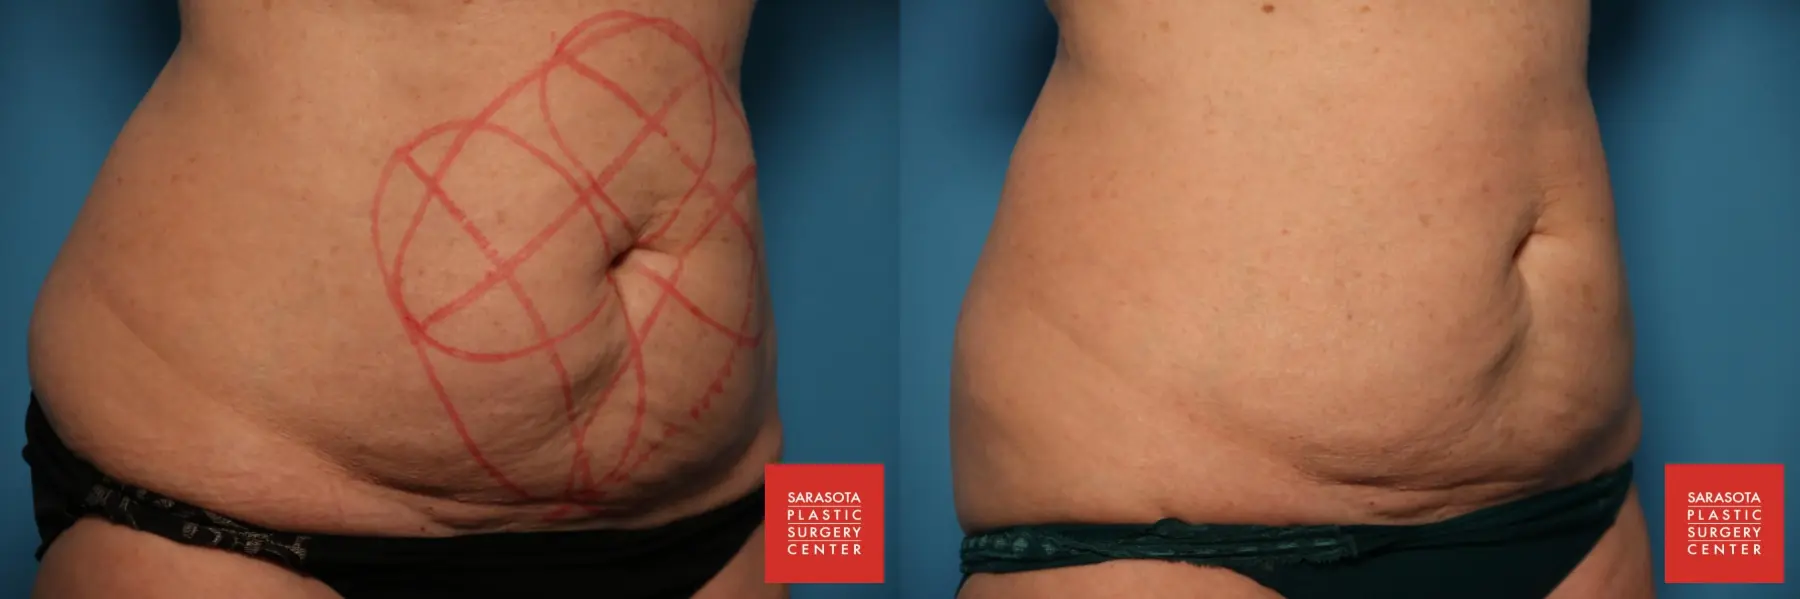 CoolSculpting®: Patient 7 - Before and After 5